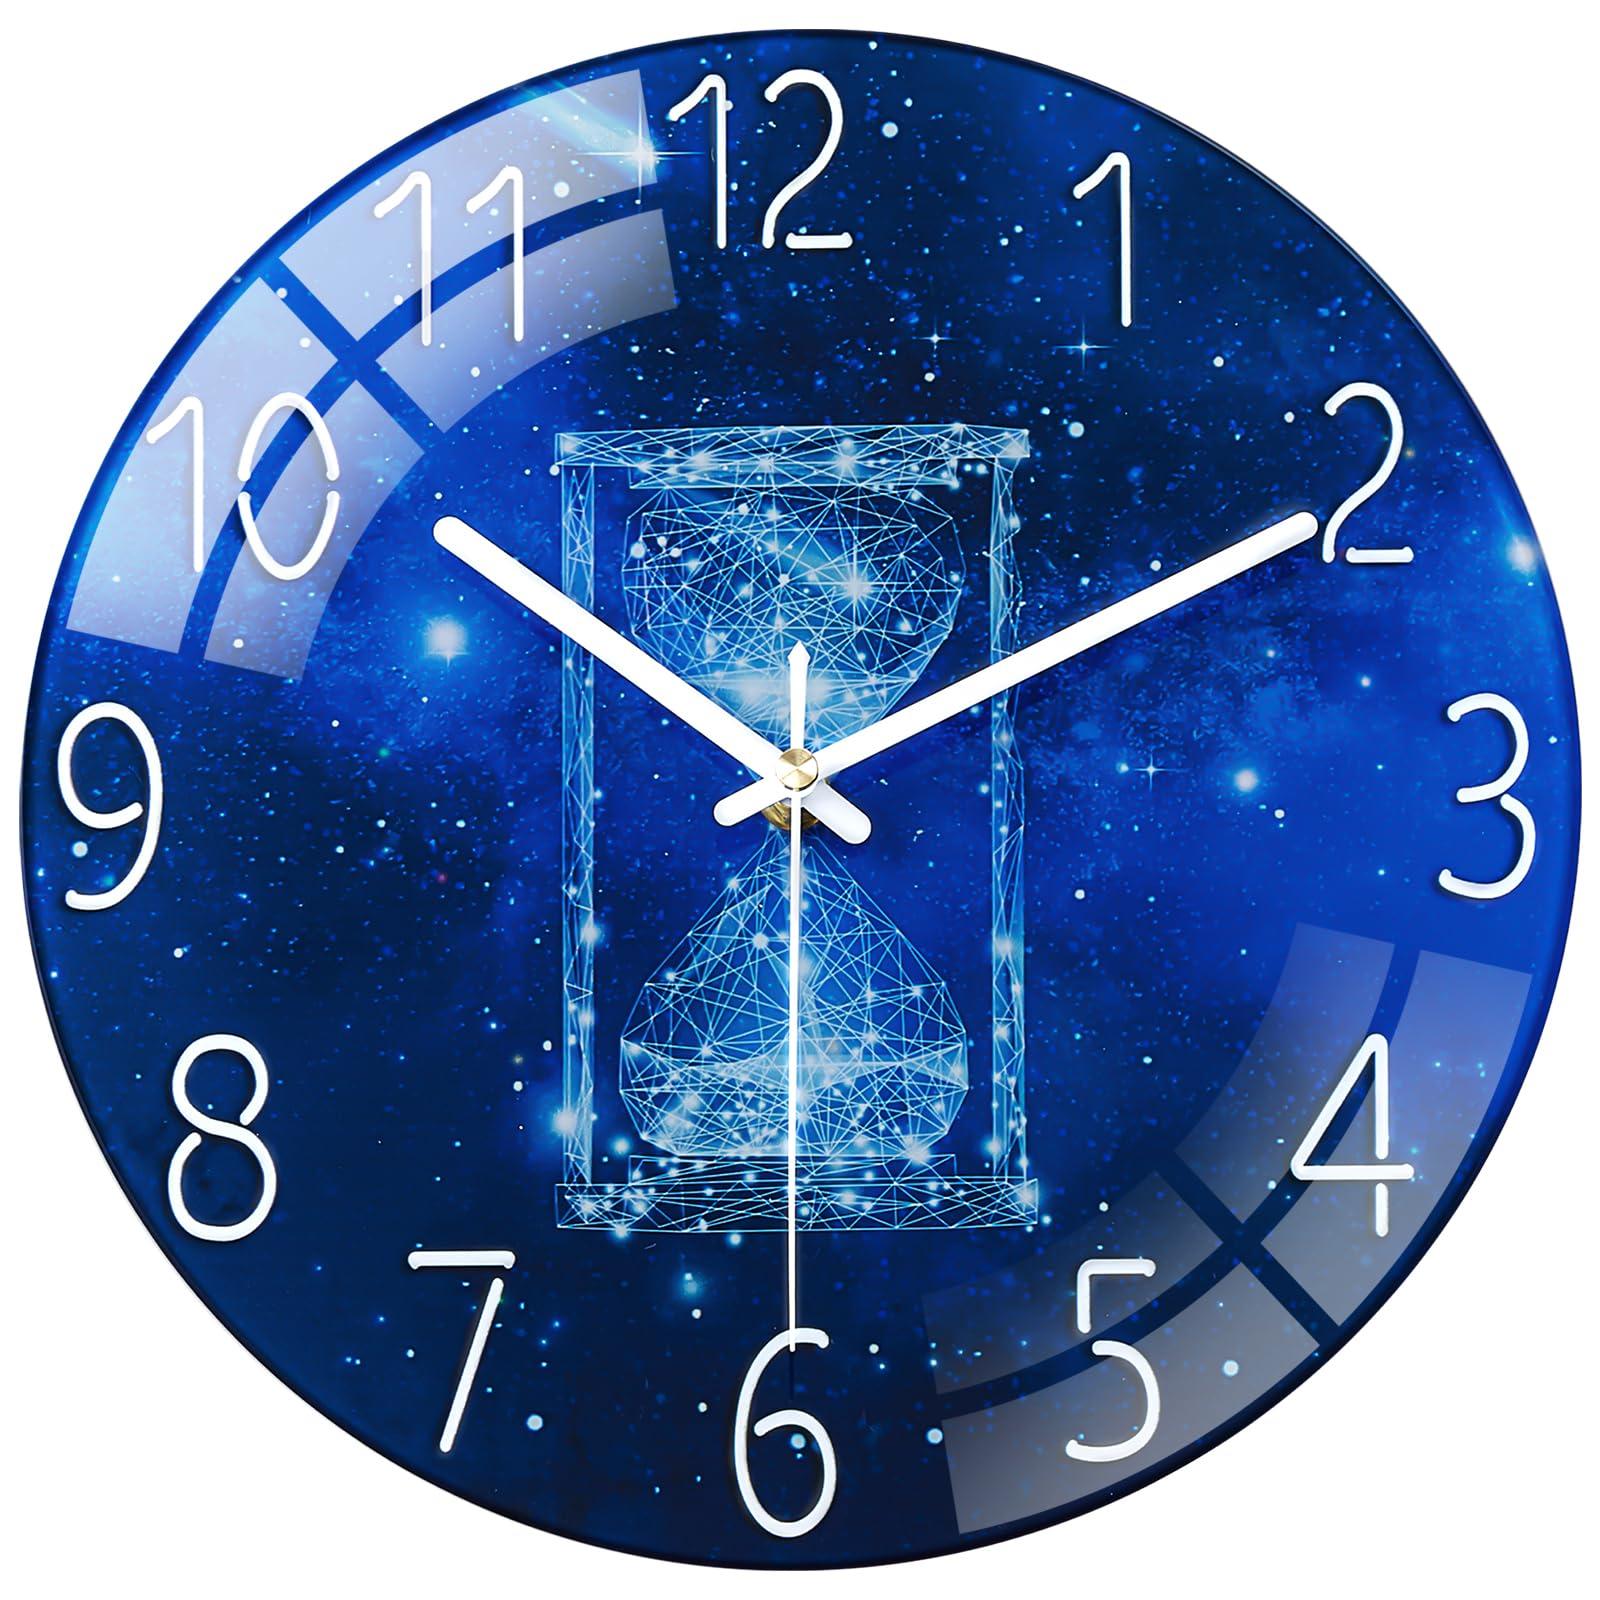 Warmiehomy Modern Glass Wall Clock 12 Inch Kitchen Wall Clocks Time Hourglass Pattern Decorative Wall Clocks for Living Room Battery Operated Silent Small Frameless Wall Clock for Bedroom Home Decor 0